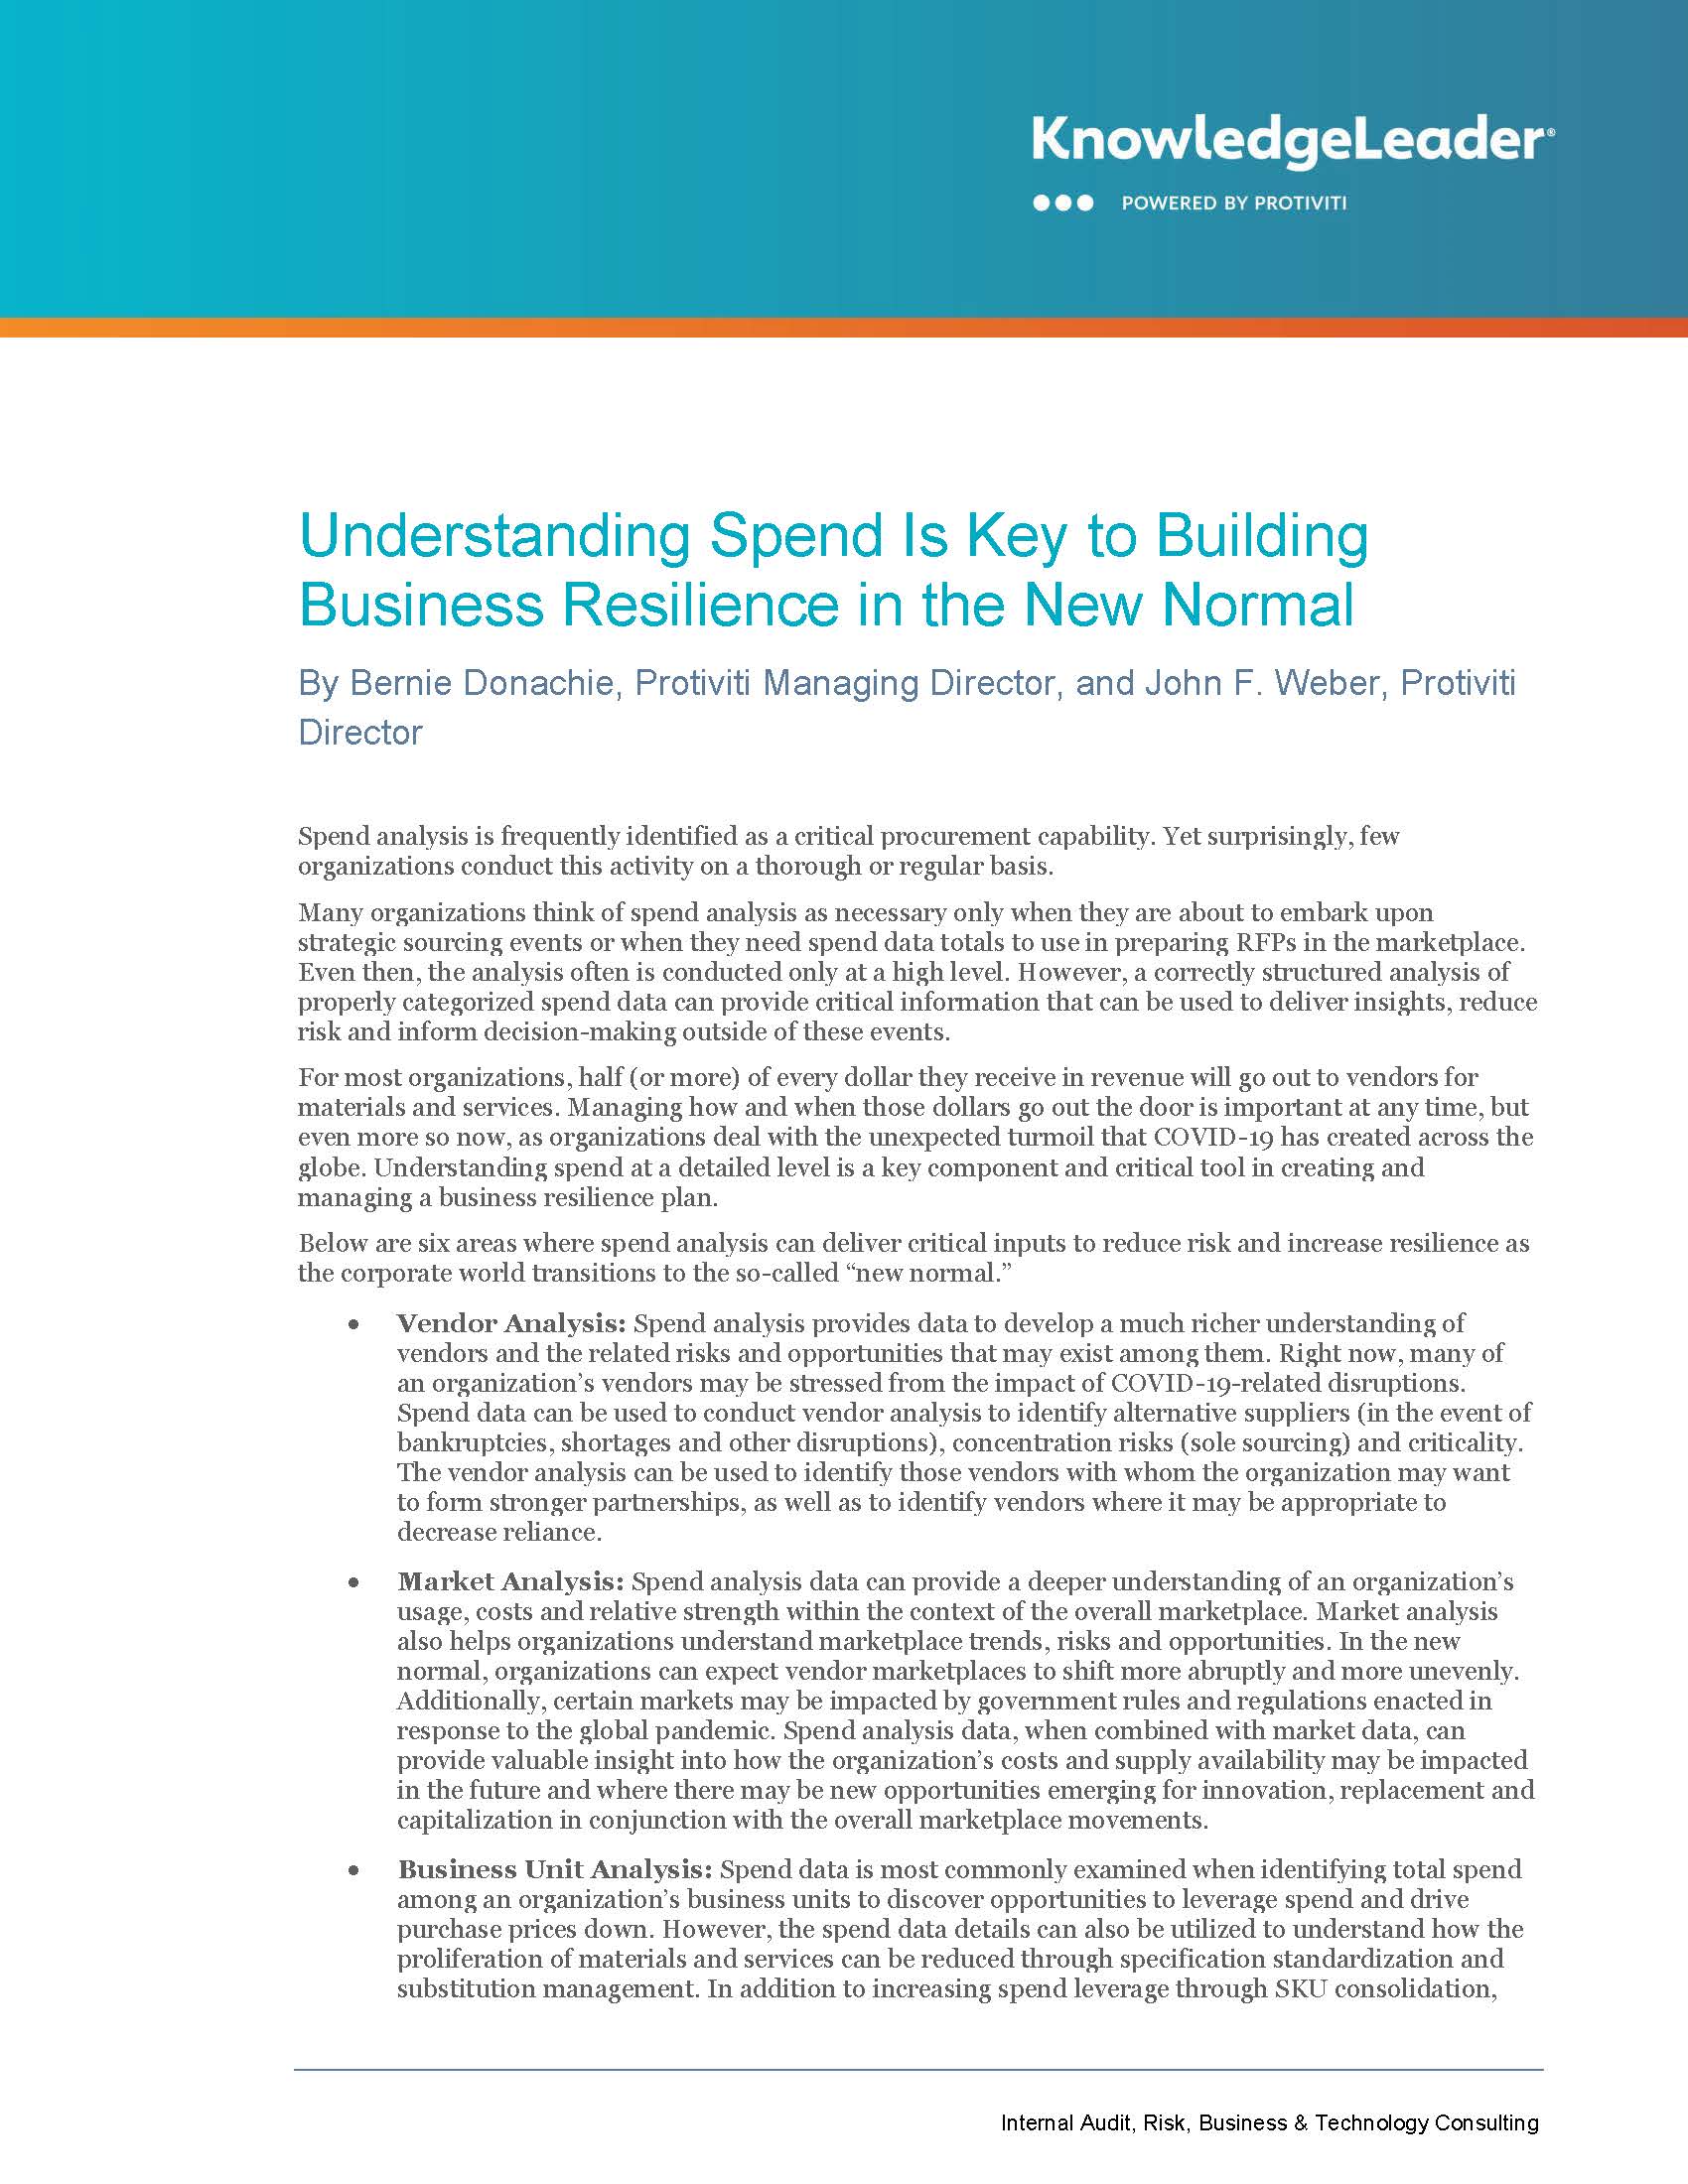 Screenshot of the first page of Understanding Spend Is Key to Building Business Resilience in the New Normal